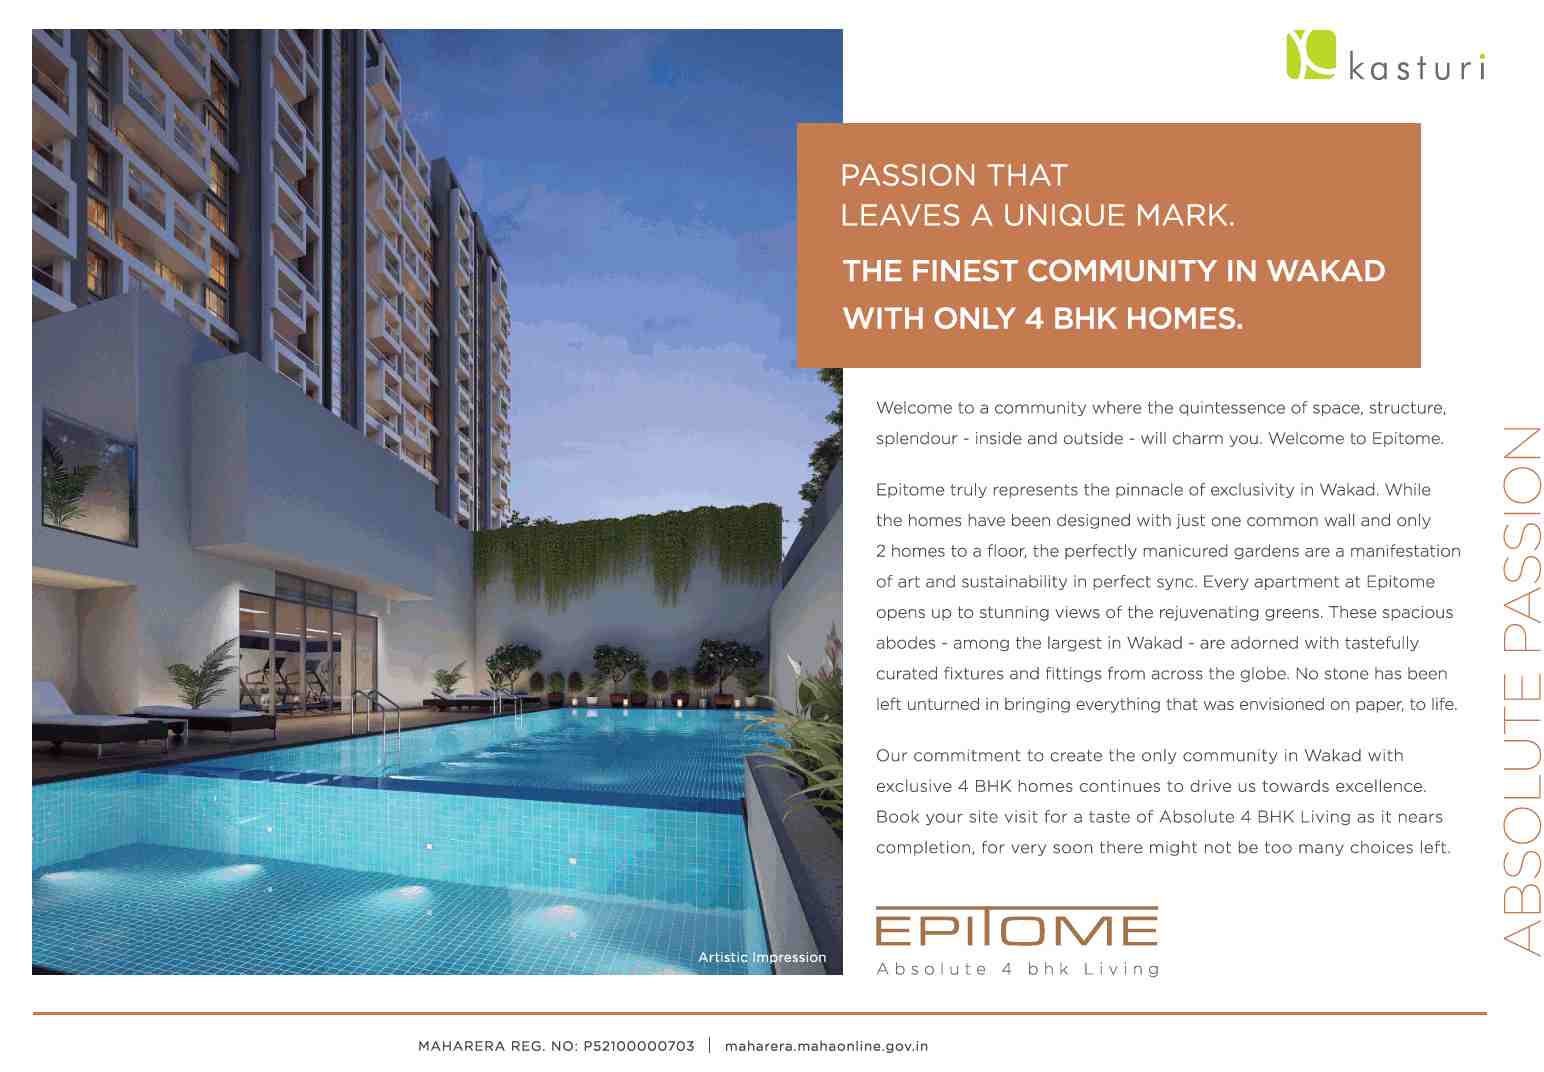 Live in the finest community with only 4 BHK homes at Kasturi Epitome in Pune